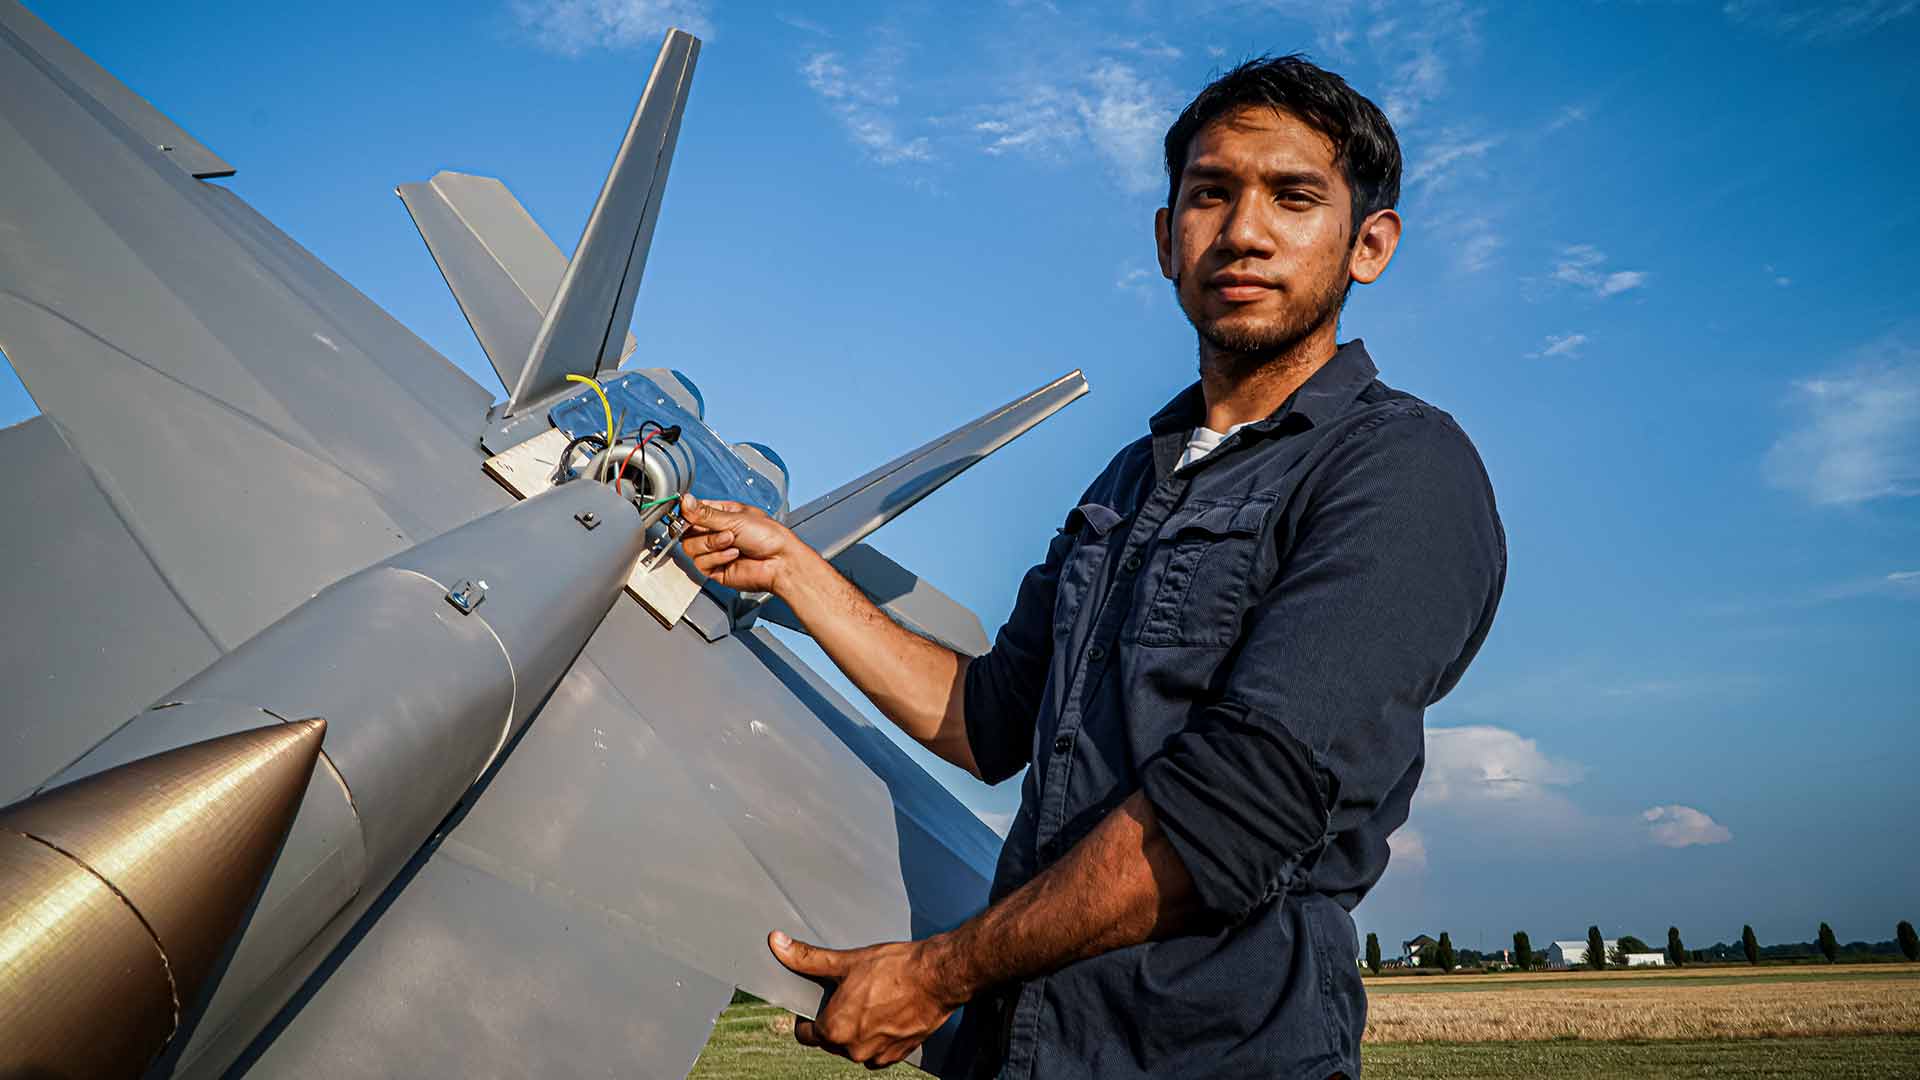 YouTube Creator Peter Sripol stands in an open field holding his large model F-18 as part of the US Navy's Sailor Versus series.